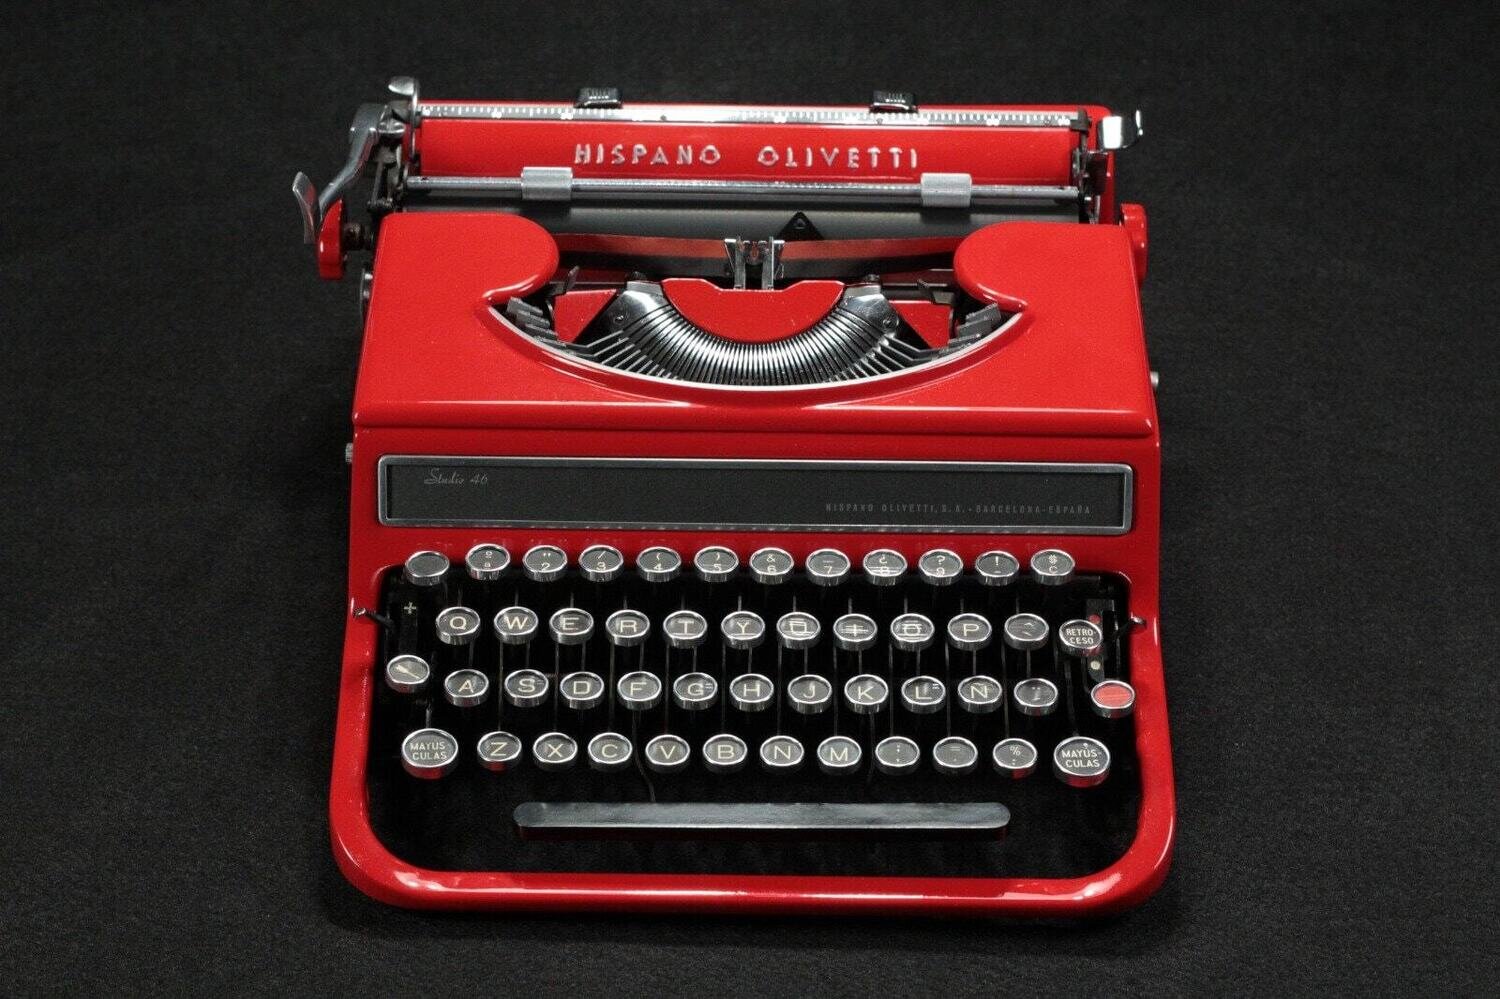 Limited Edition Hispano Olivetti Studio 46 (42) Red Typewriter, Vintage, Manual Portable, Professionally Serviced by Typewriter.Company